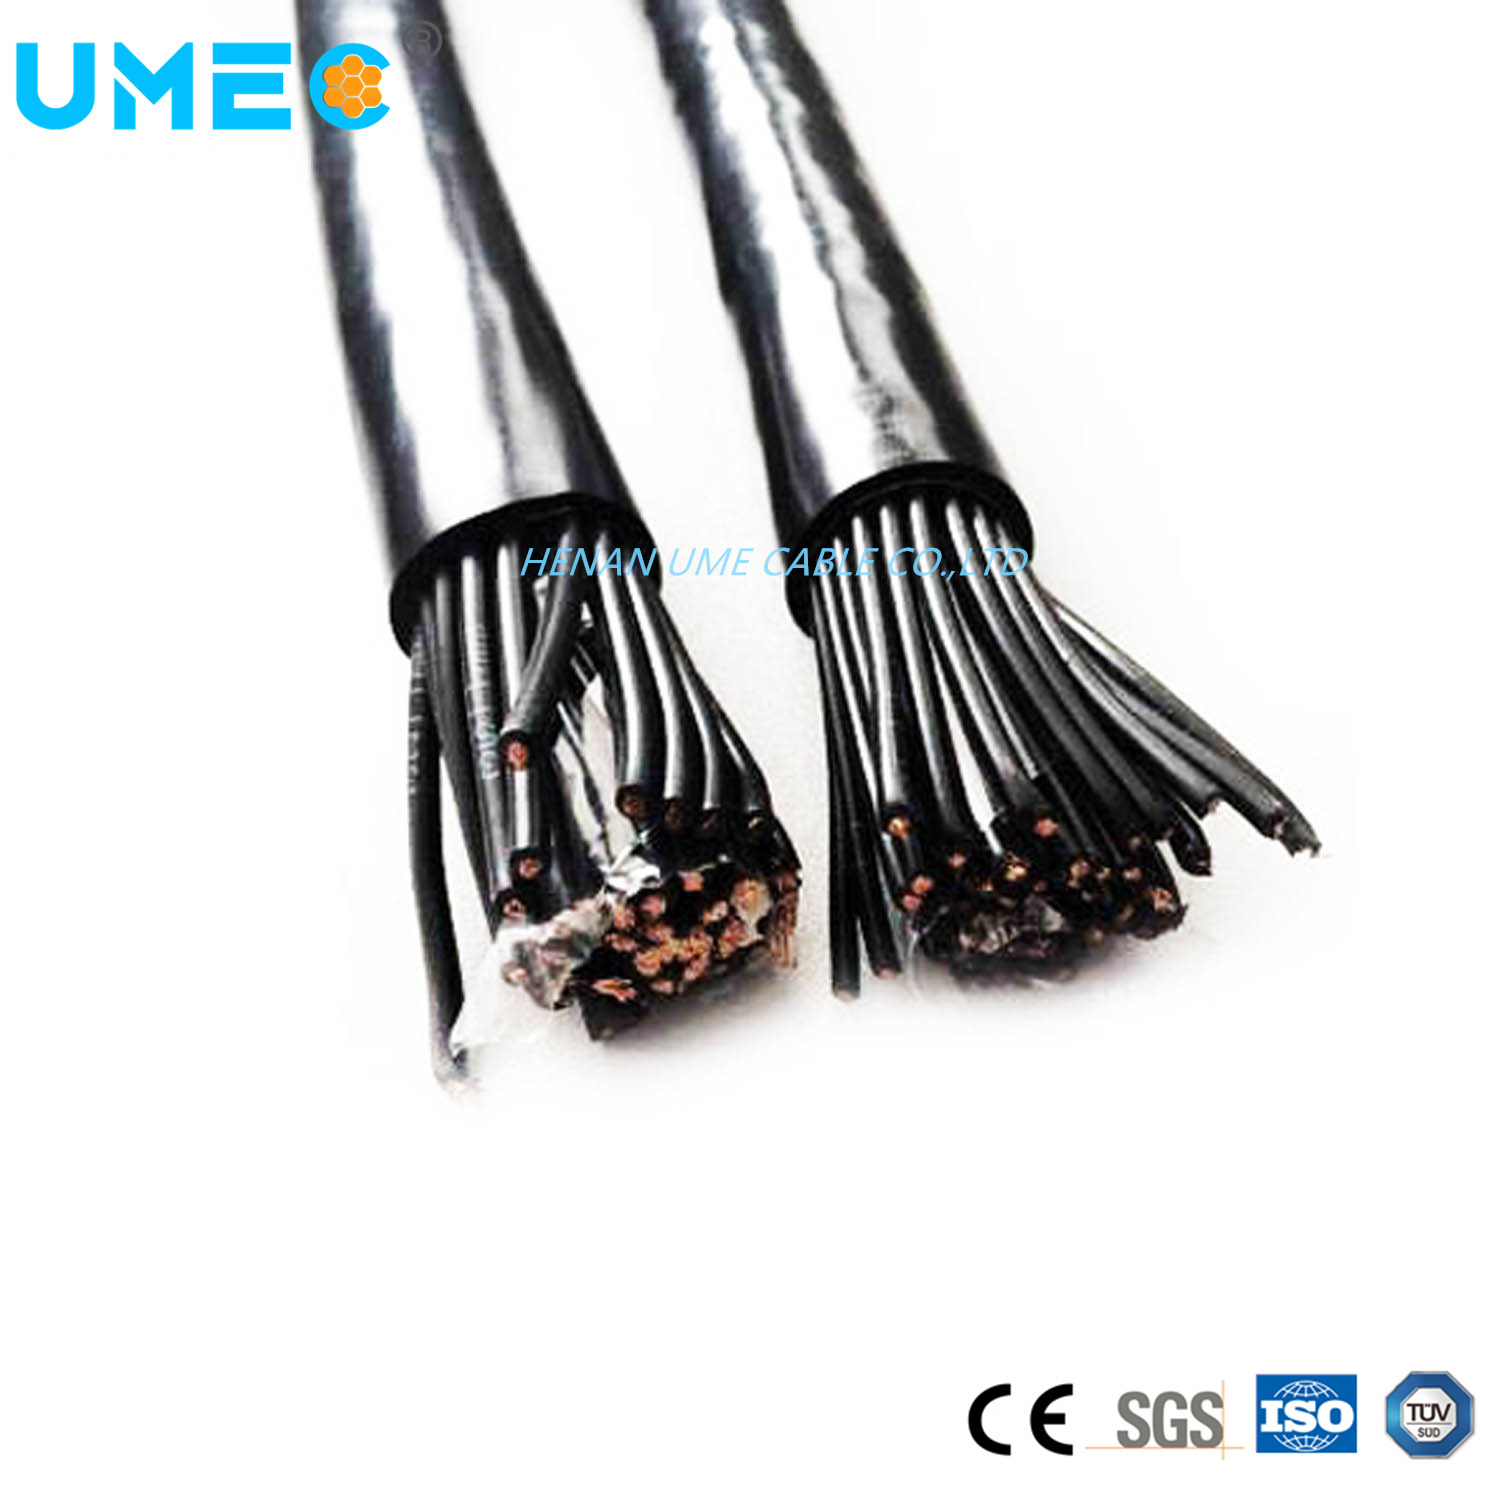 Low Voltage 450/750V 2cores to 48cores Control Cable